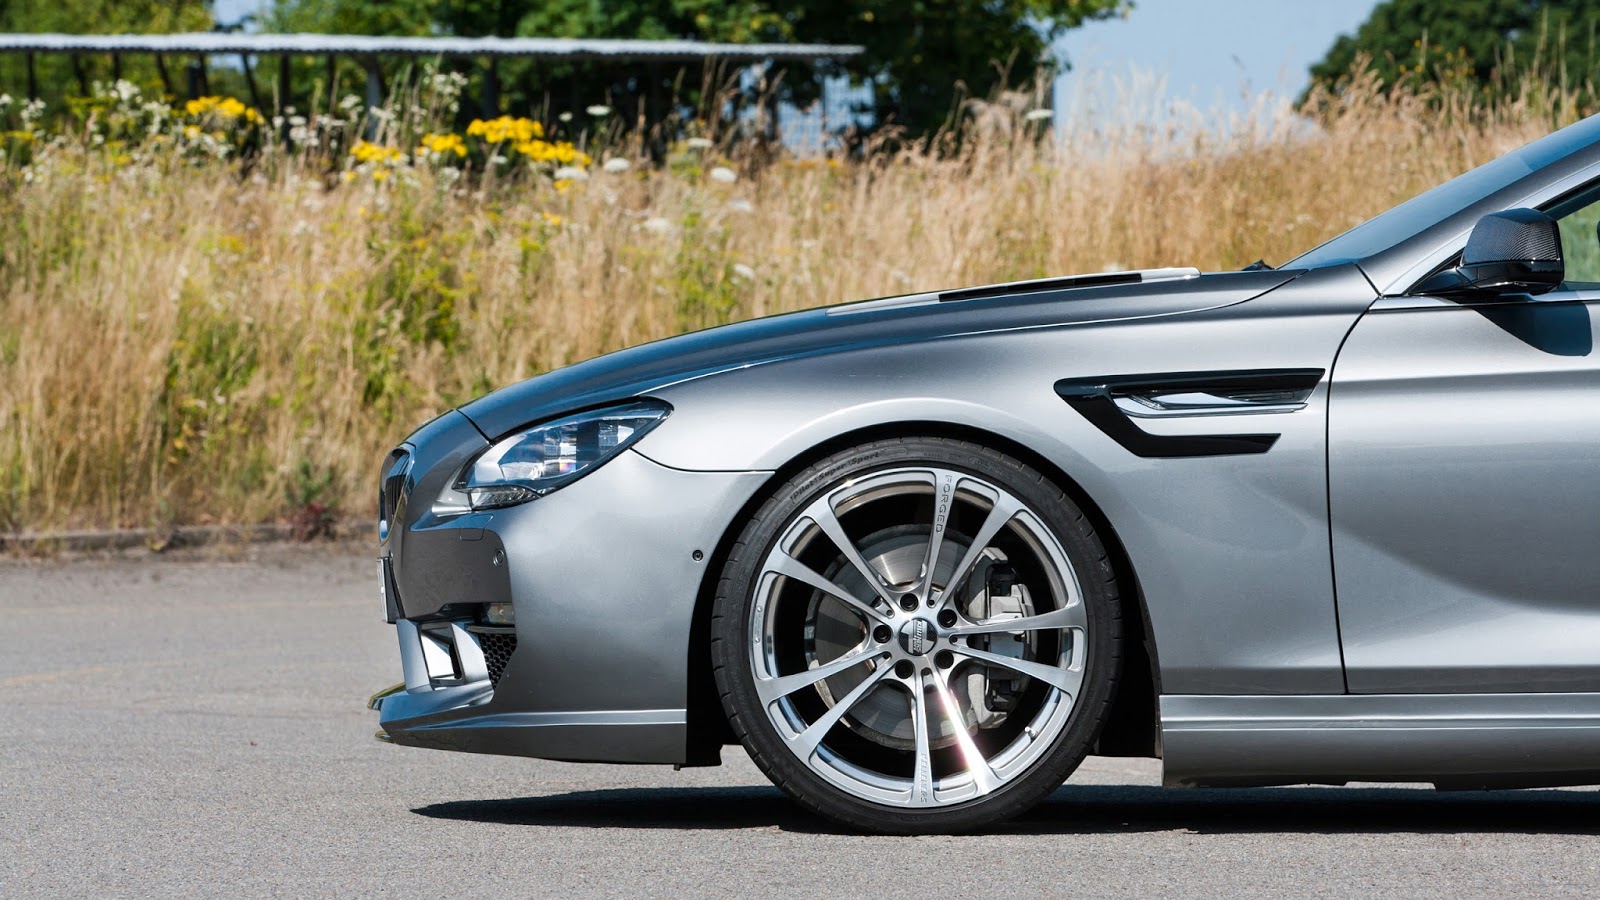 2013 BMW 6er ( F06 ) Gran Coupé by Kelleners #393910 - Best quality free  high resolution car images - mad4wheels